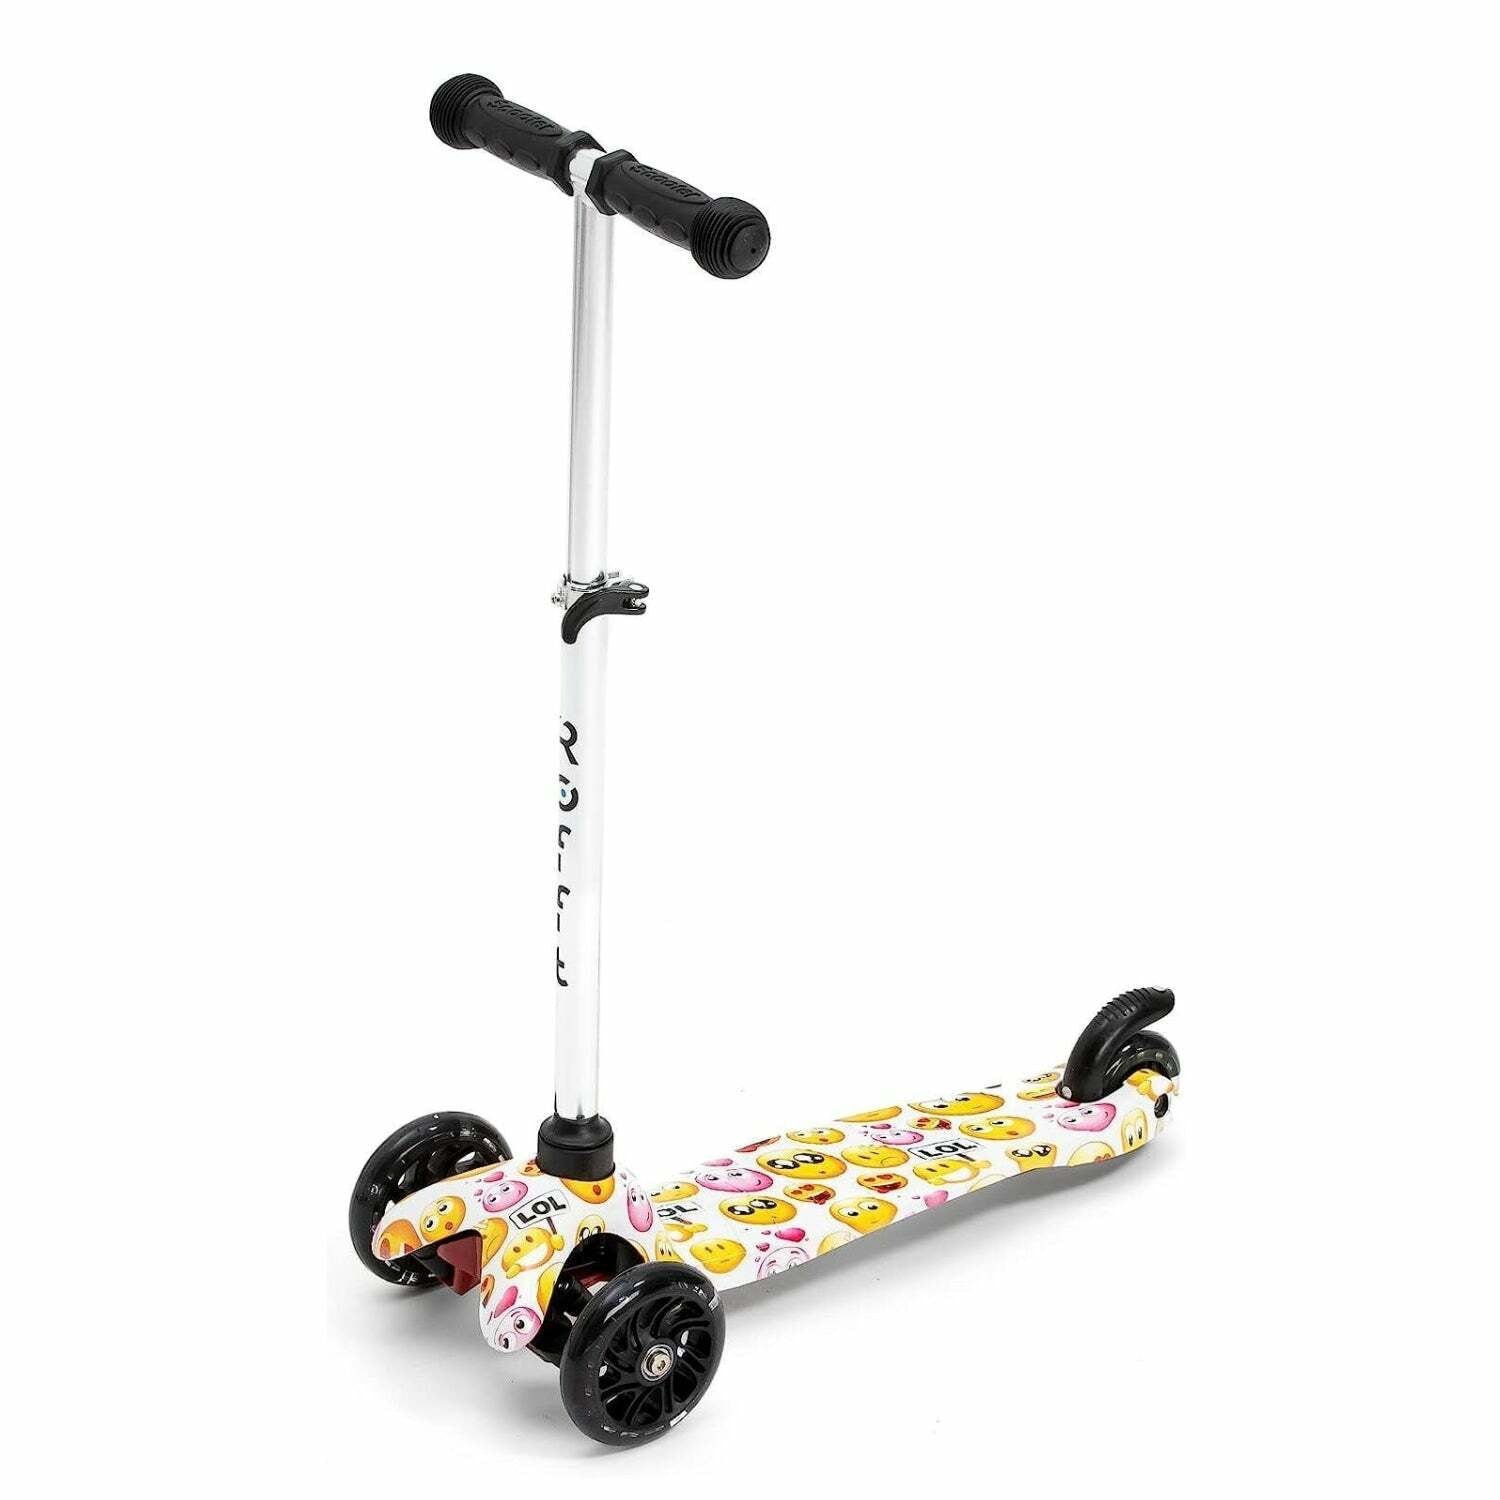 ROFFT - Kick Scooter, Lean-to-Steer LED 3 Wheel, Kids Ages 3-5, Graffiti Black